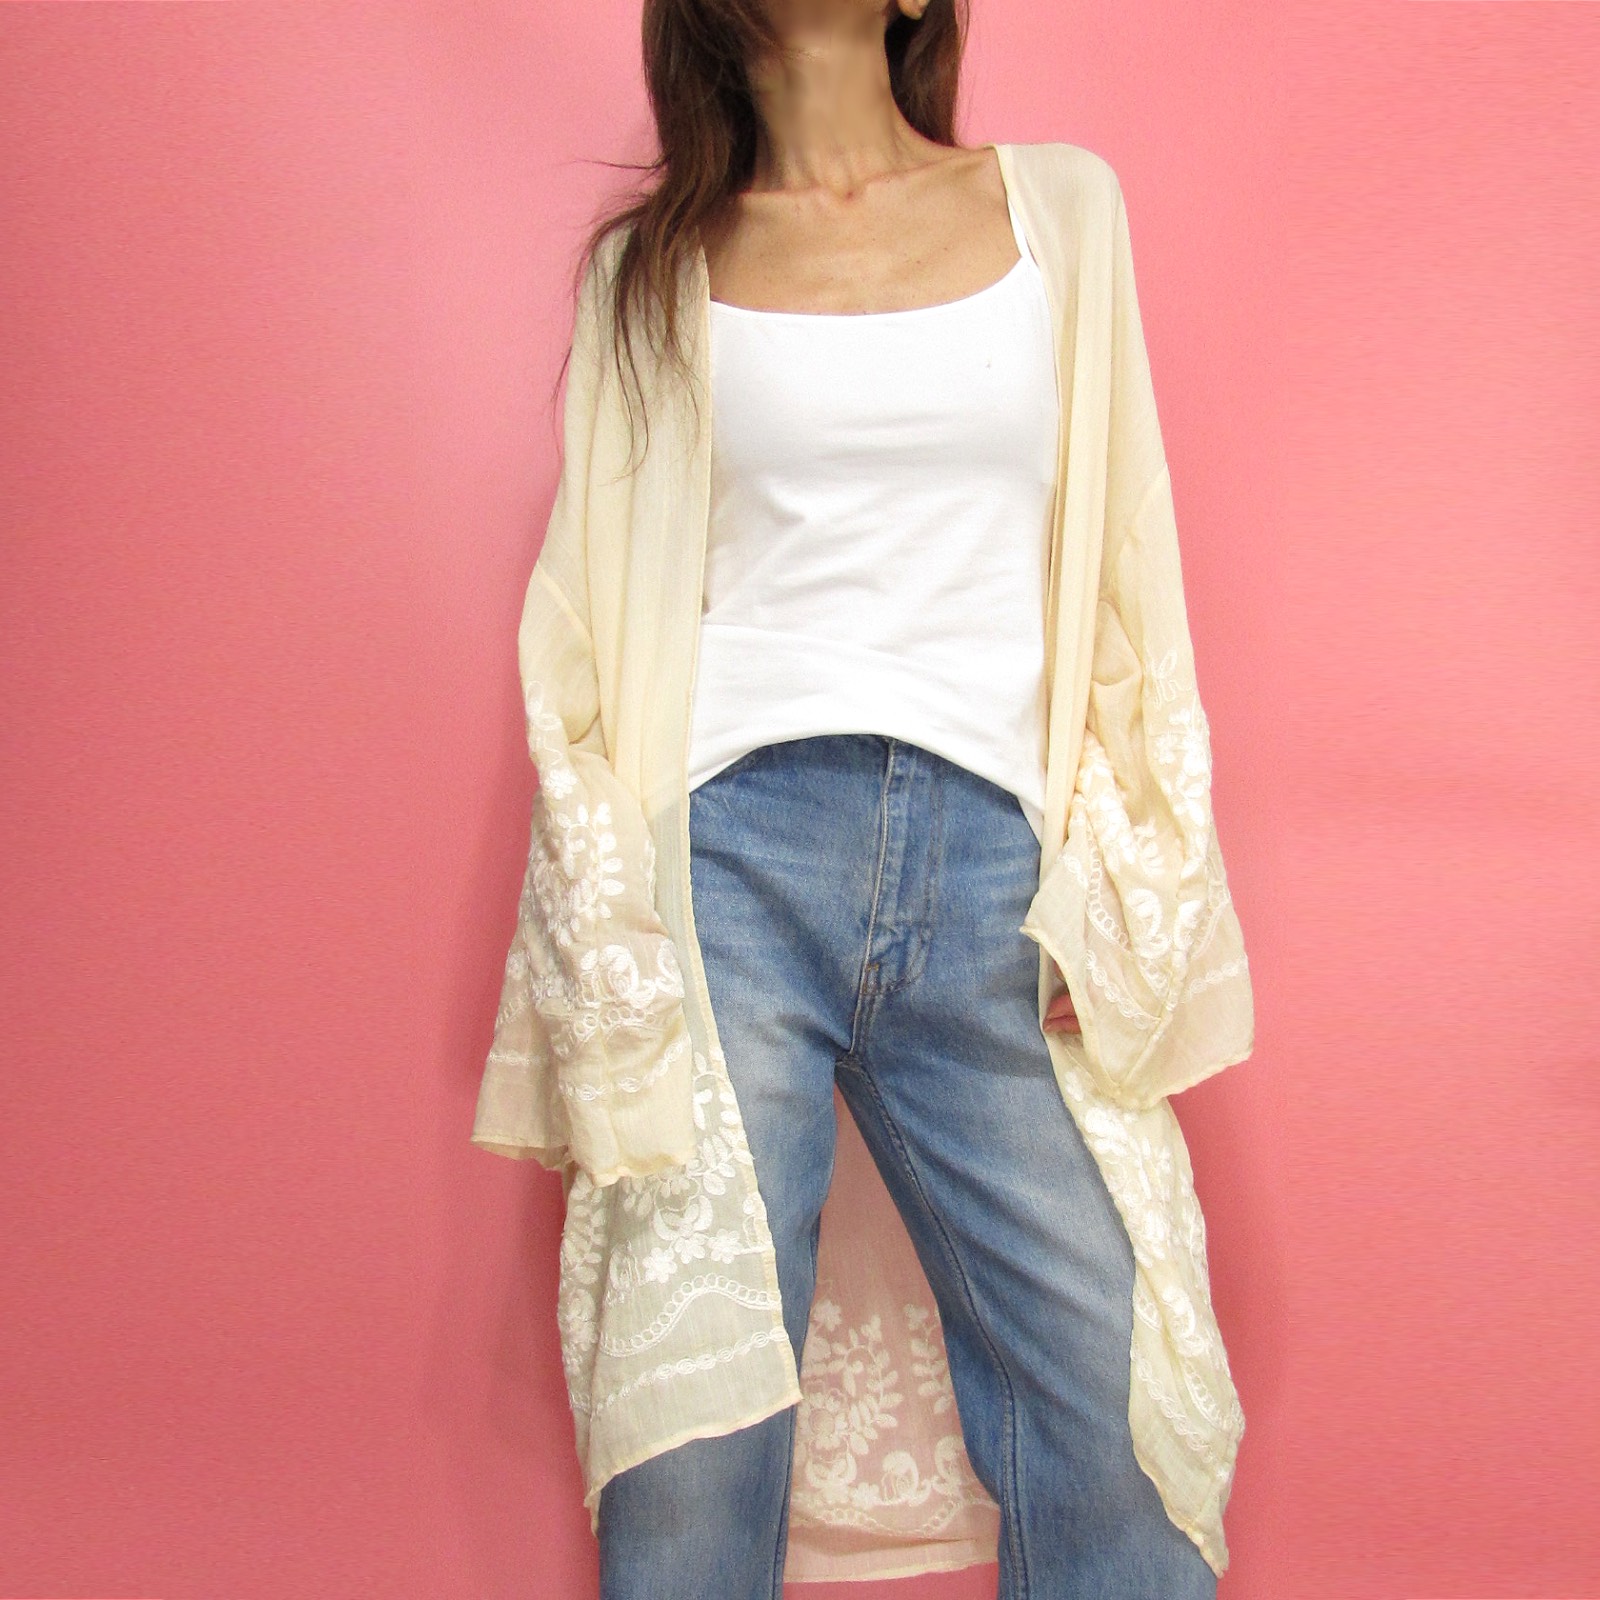 Outer099 Embroidered Light Weight Kimono/Cream